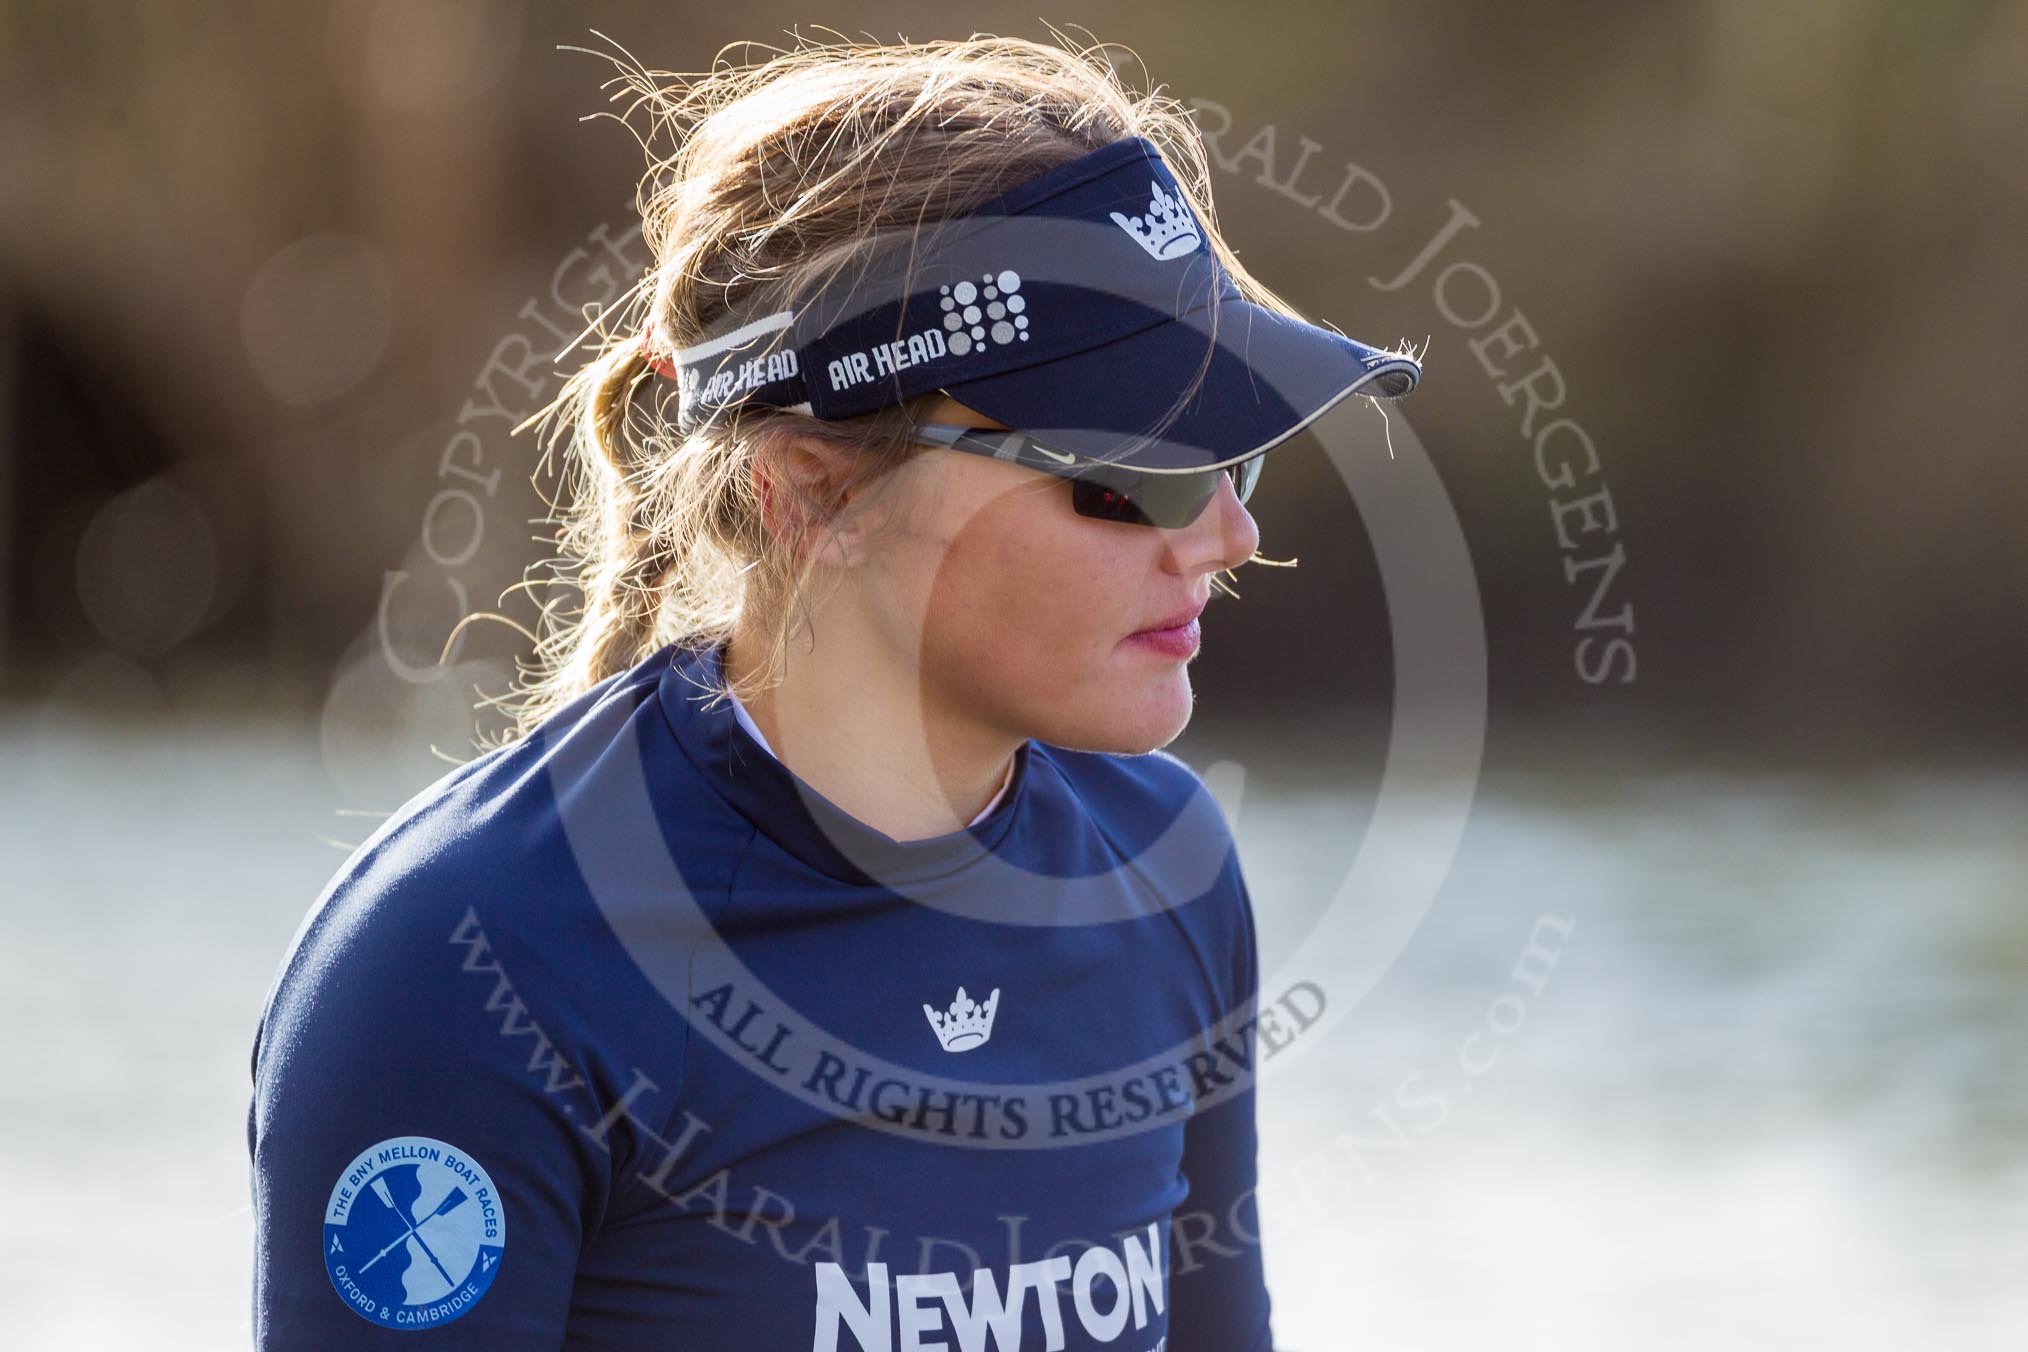 The Boat Race season 2015: OUWBC training Wallingford.

Wallingford,

United Kingdom,
on 04 March 2015 at 15:38, image #31